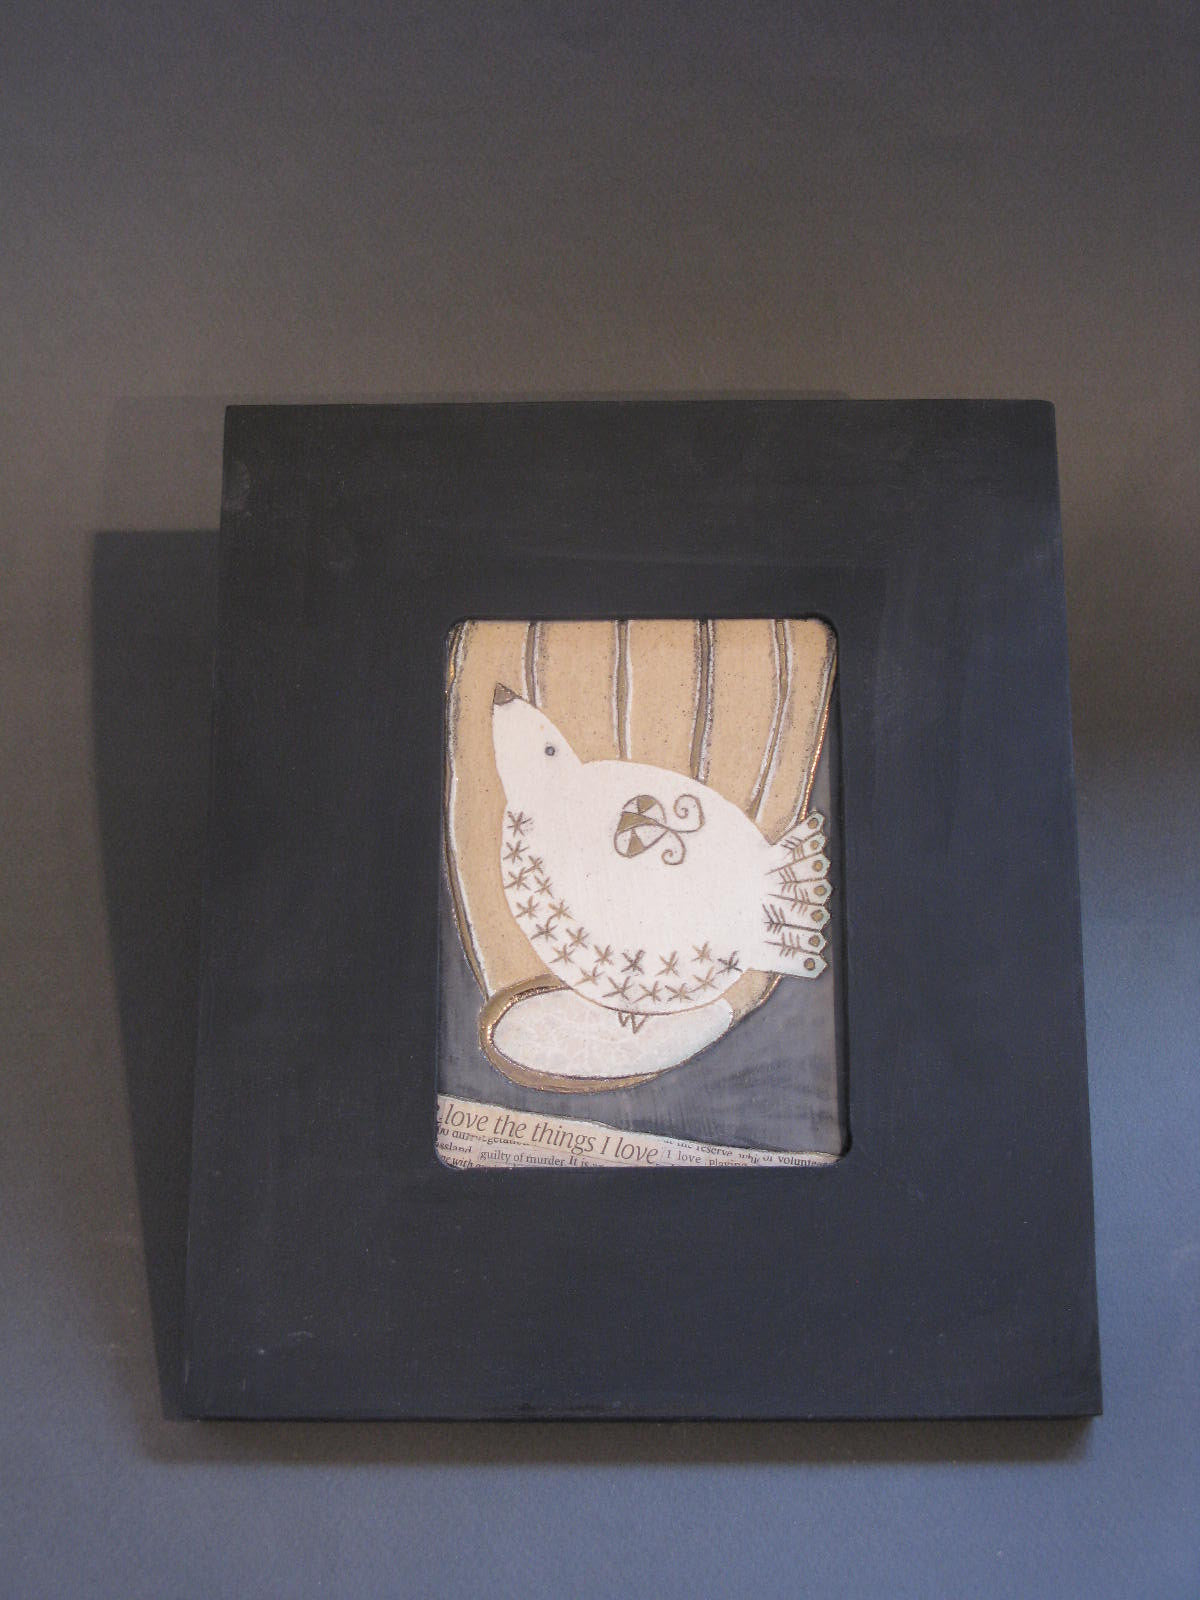 Black Framed Ceramic Tile of Bird with Collage and Gilding by Sophie Smith